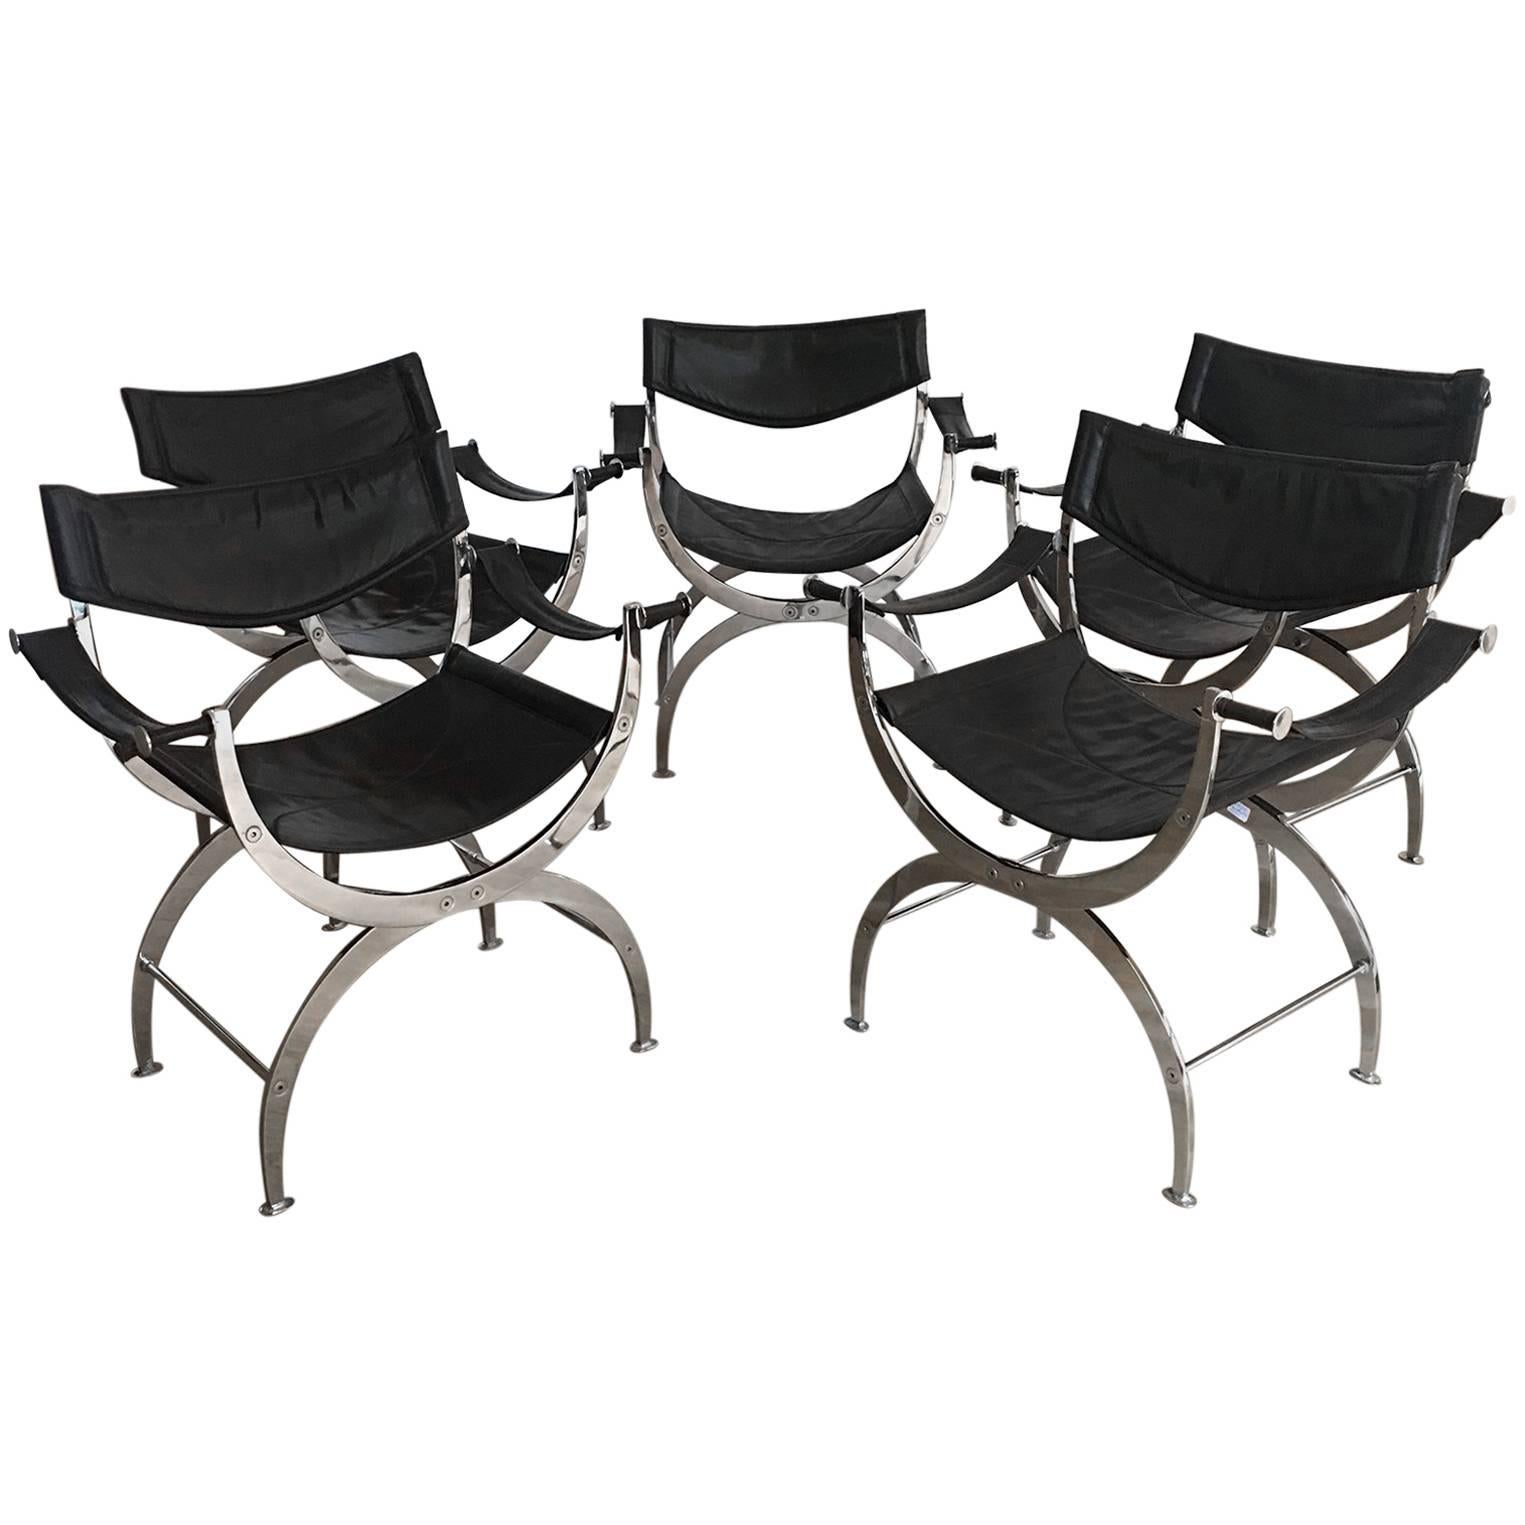 Set of Five Chrome and Leather Curule Chairs, in the Style of Maison Jansen